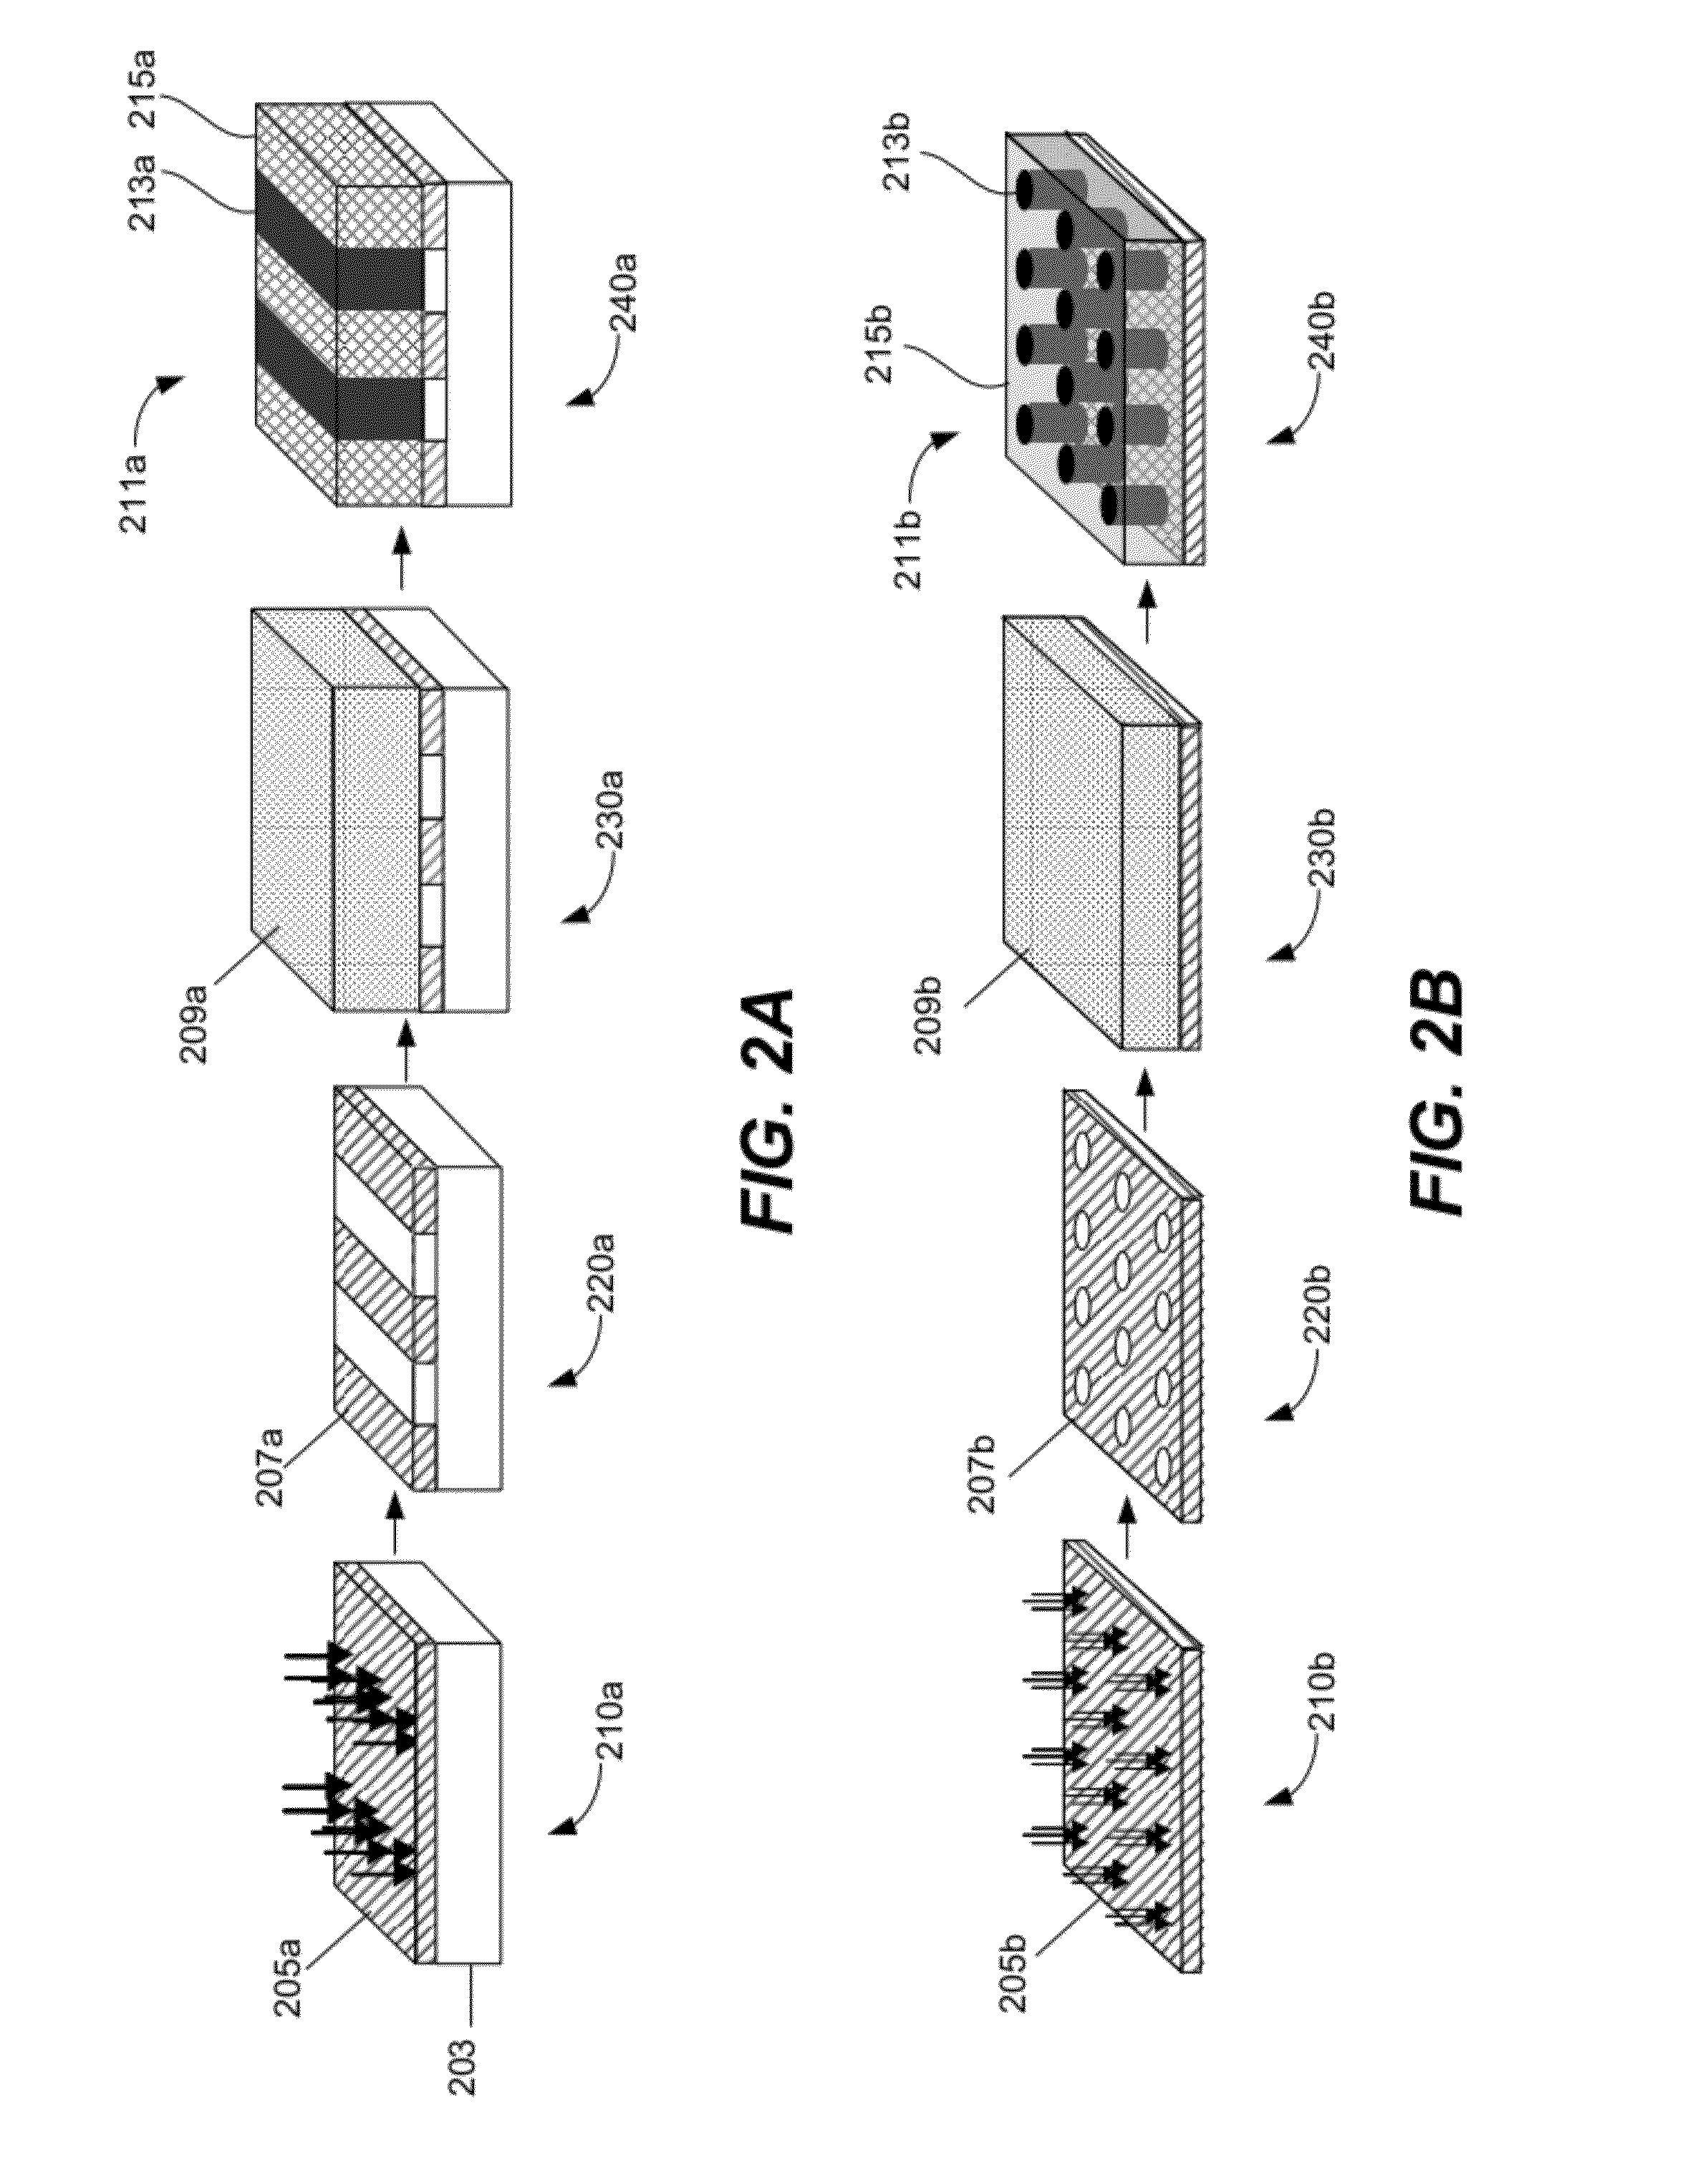 Solvent annealing block copolymers on patterned substrates